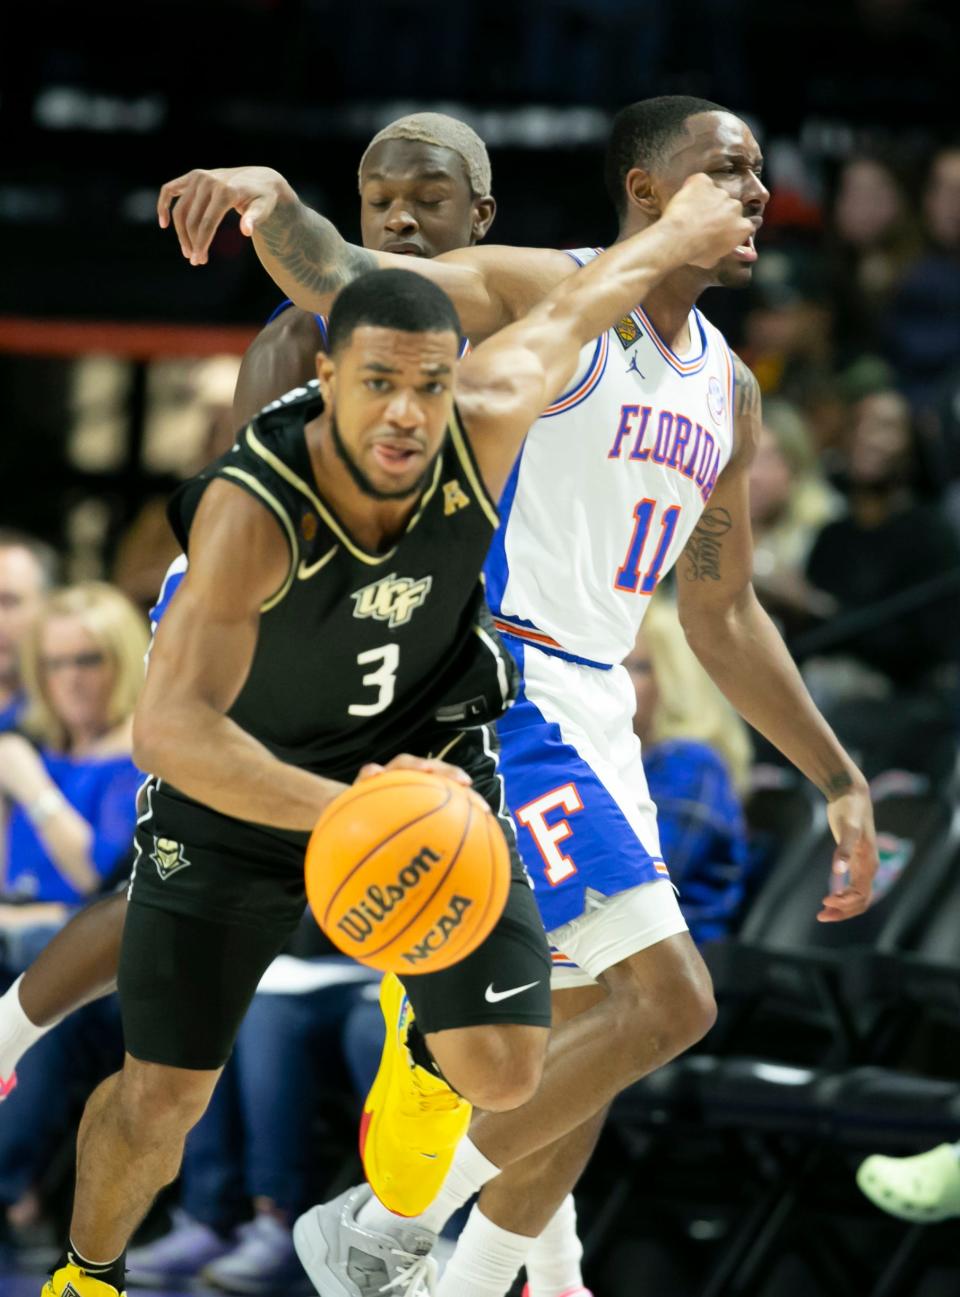 UCF Knights guard Darius Johnson (3) steals the ball from Florida Gators guard Kyle Lofton (11) during the first half of the NIT tournament Wednesday, March 15, 2023, at Exactech Arena in Gainesville, Fla. Alan Youngblood/Gainesville Sun 